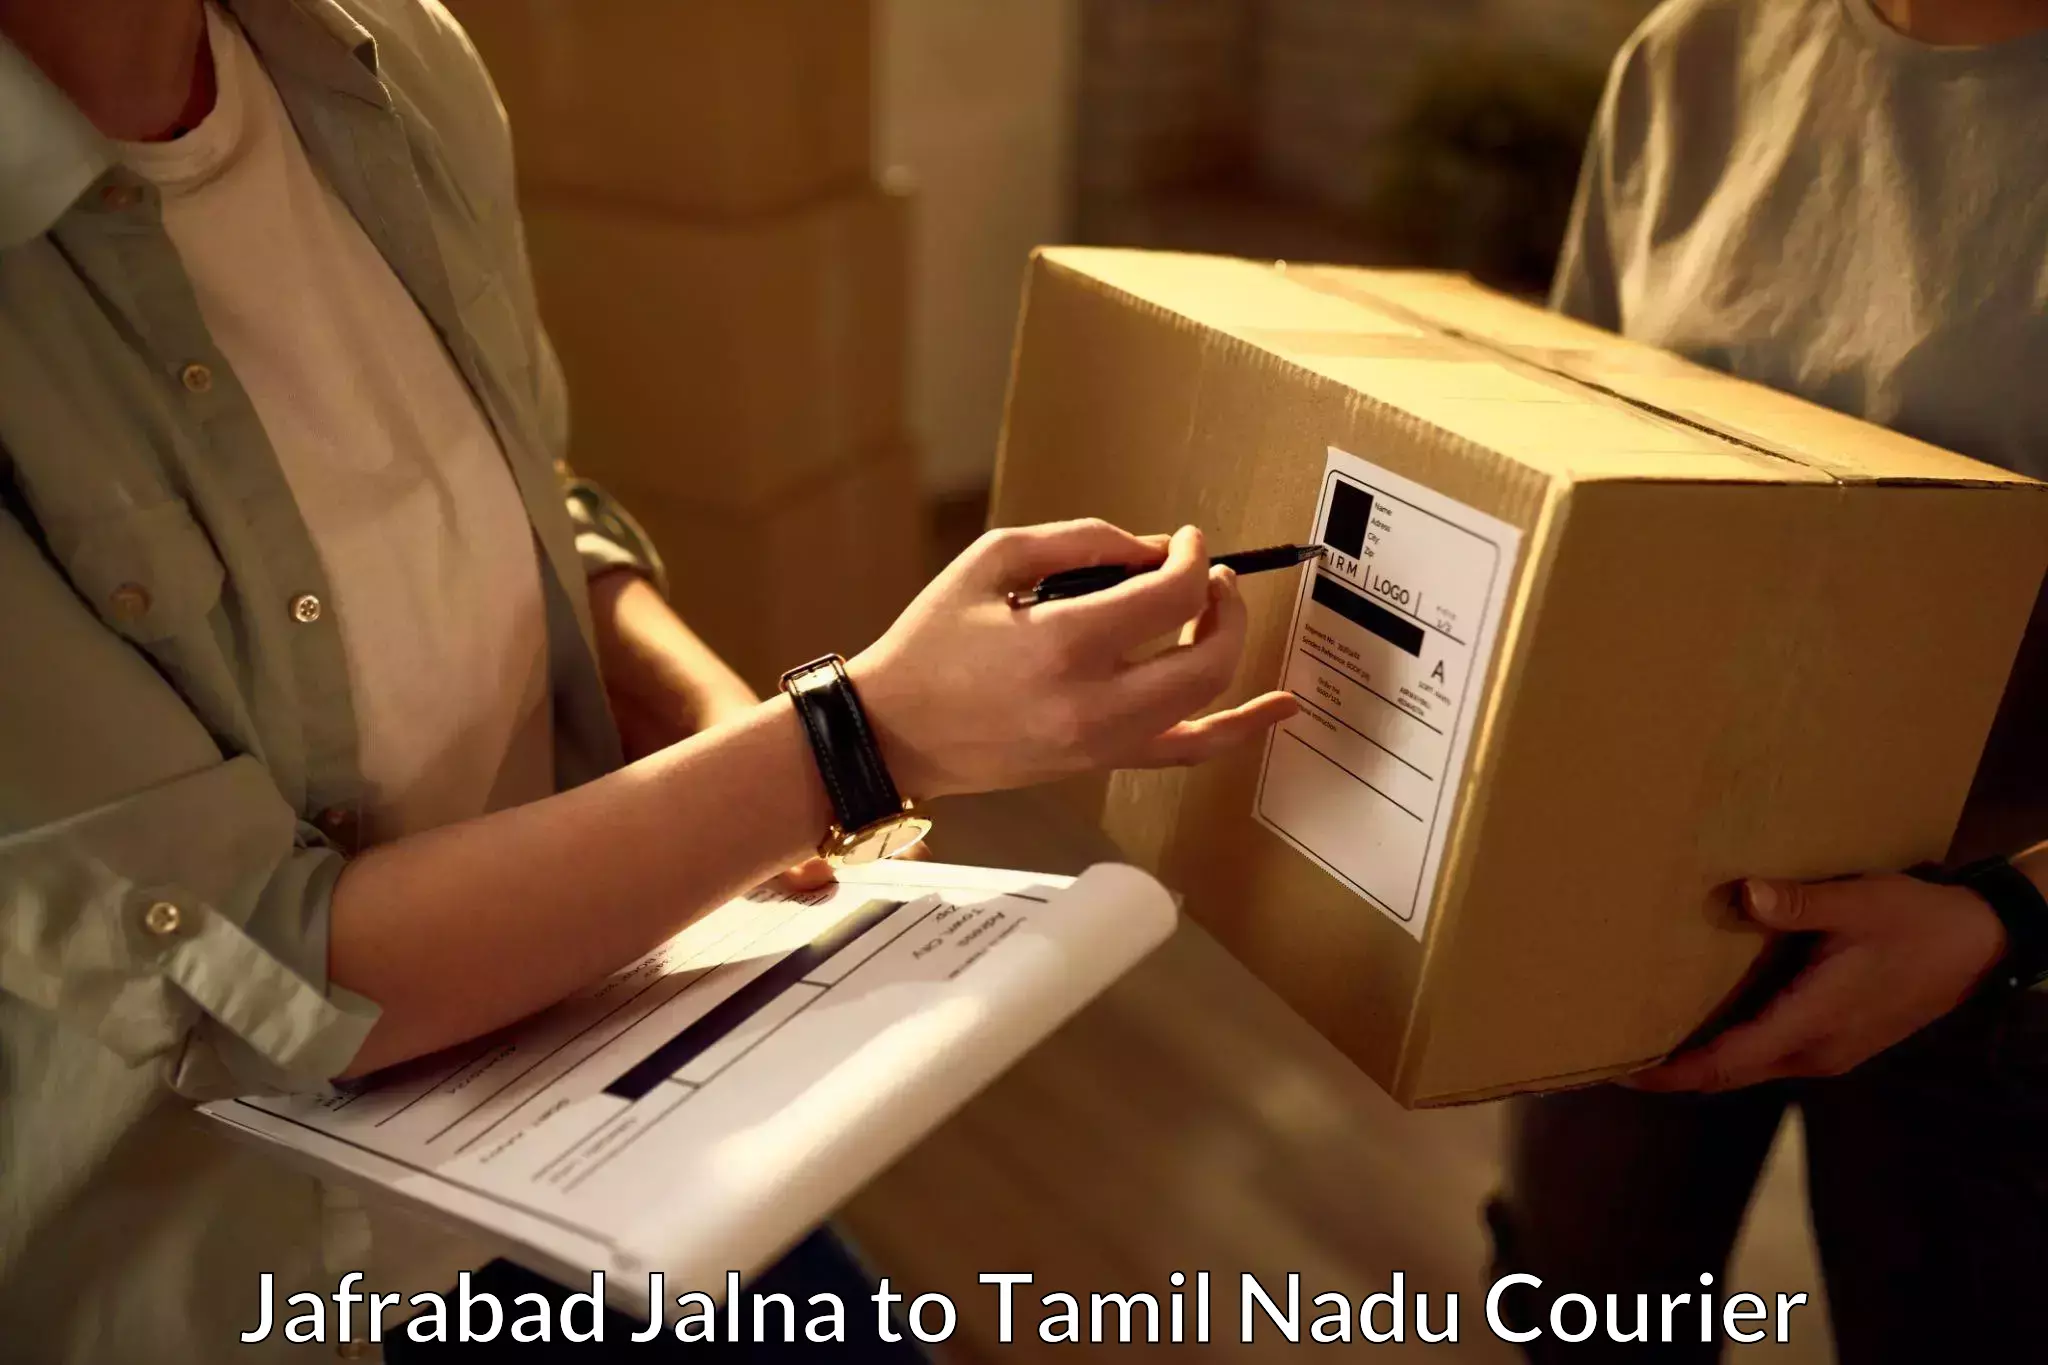 User-friendly courier app Jafrabad Jalna to Palacode